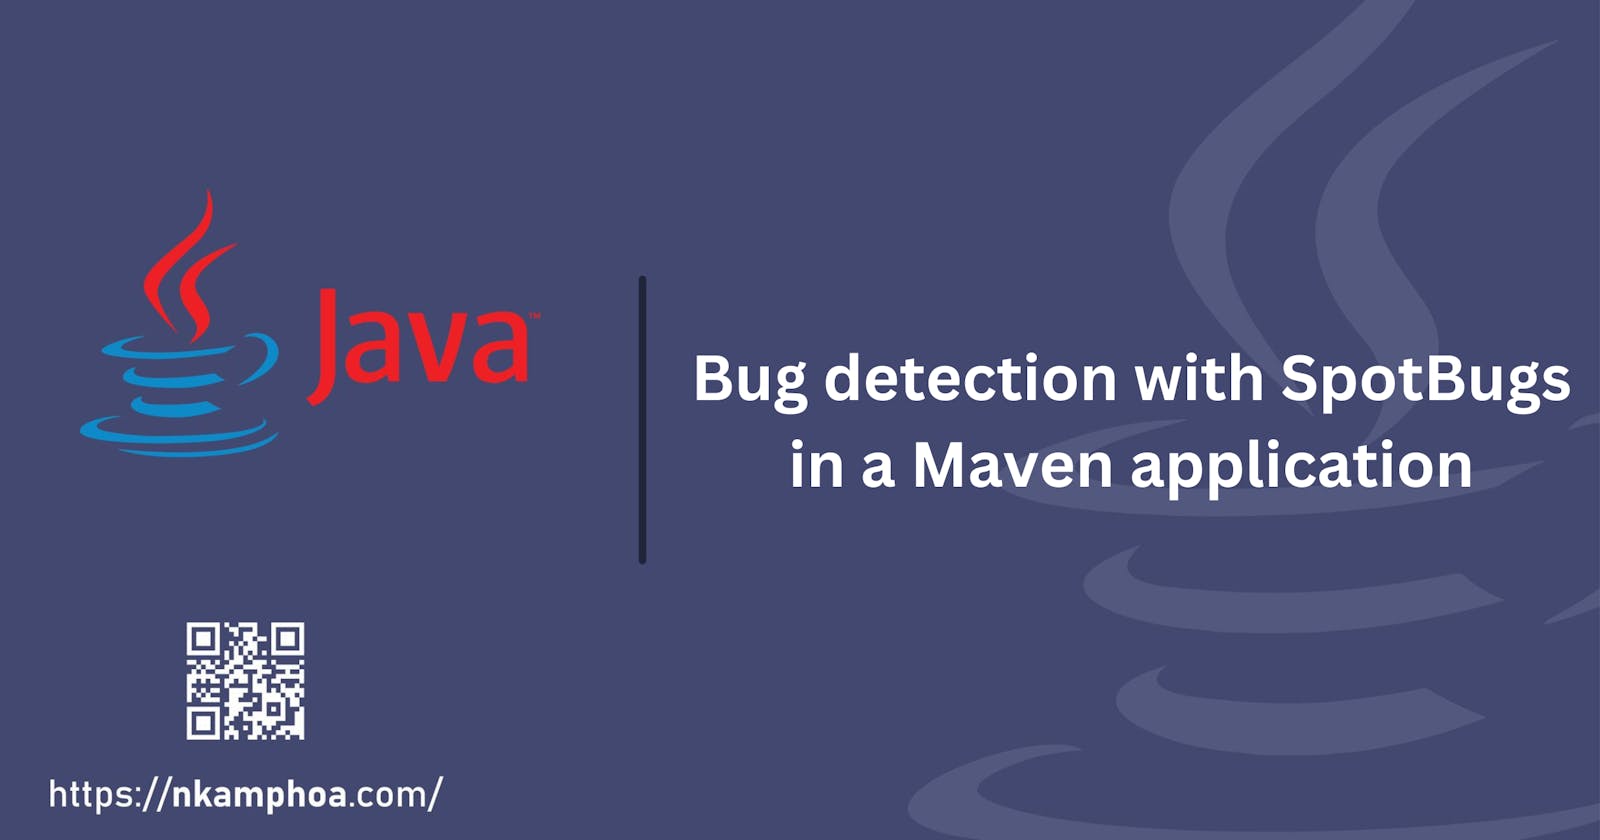 Bug detection with SpotBugs in a Maven application